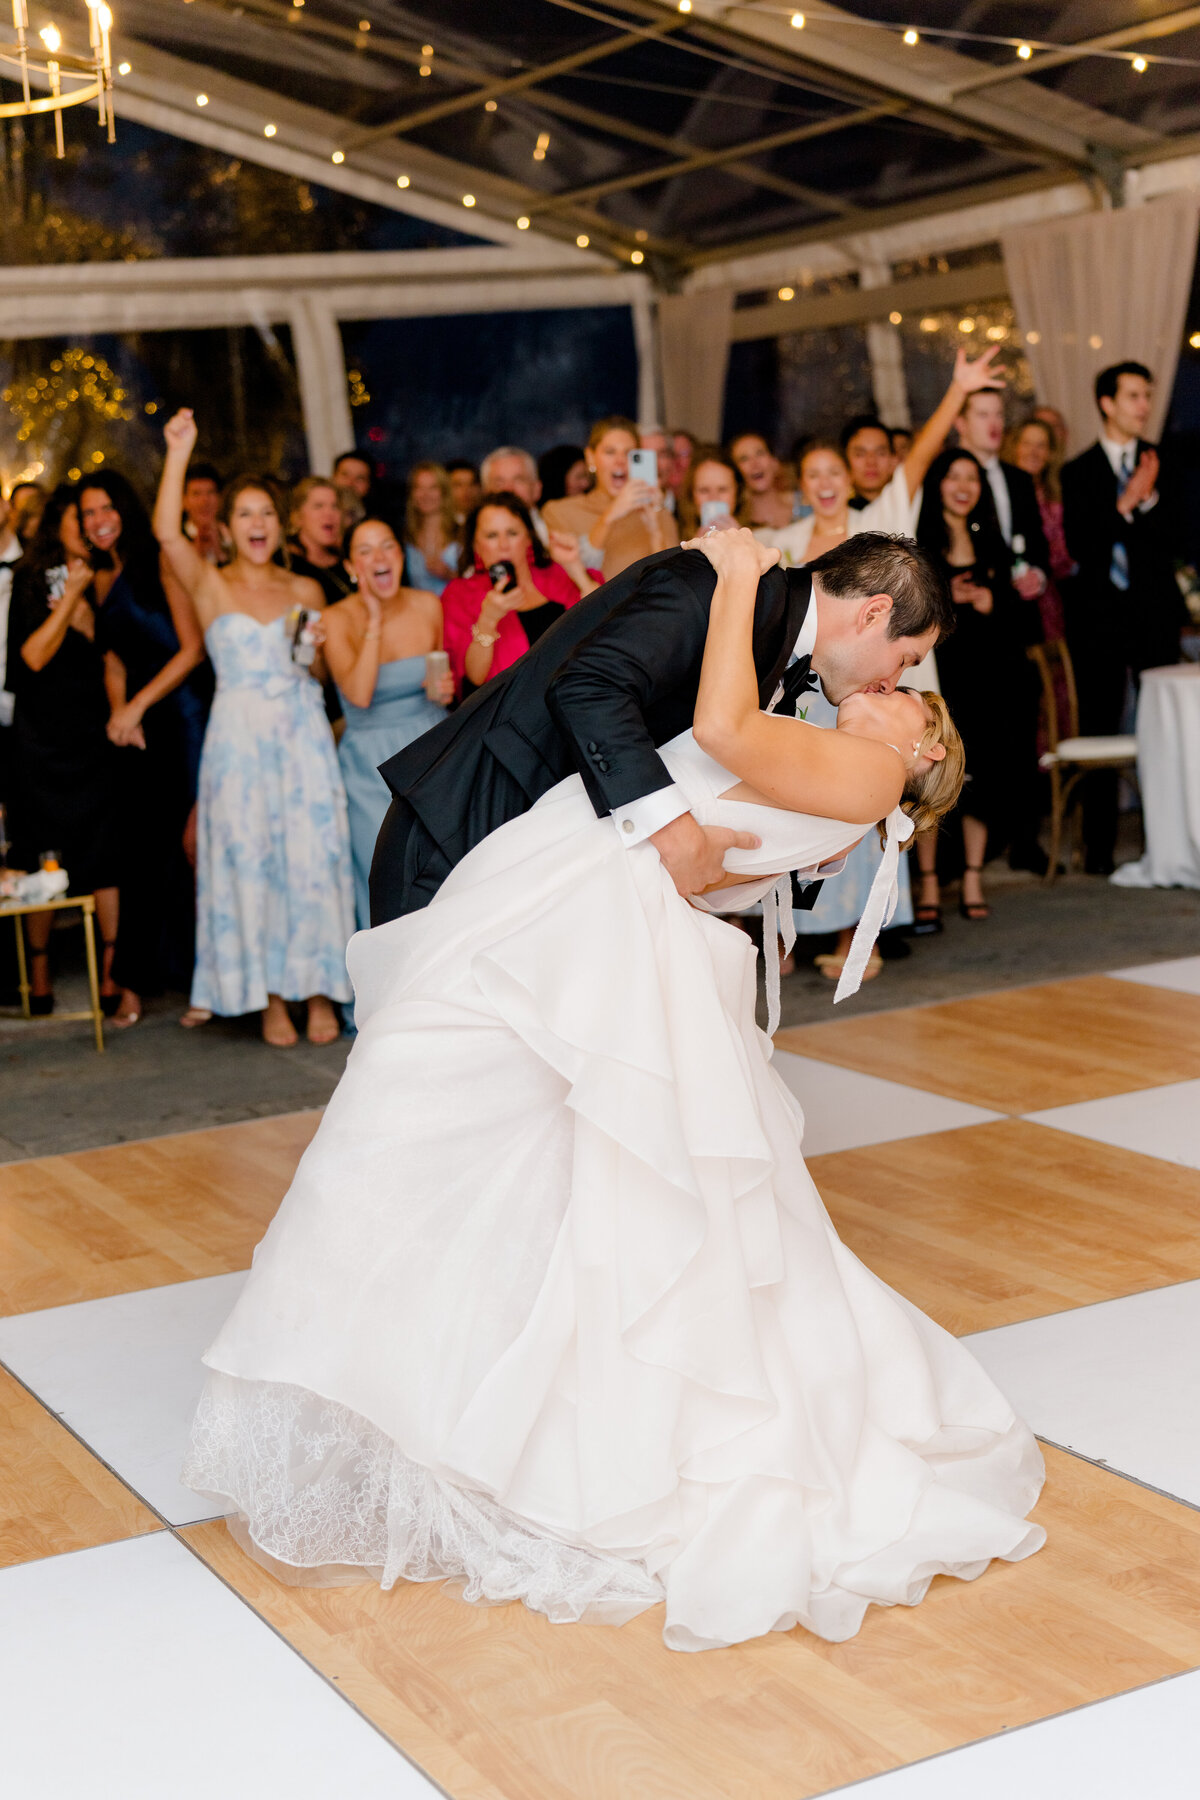 First dance wedding dip kiss with the crowd celebrating in the background. Lowndes Grove spring wedding in Charleston. Kailee DiMeglio Photography.